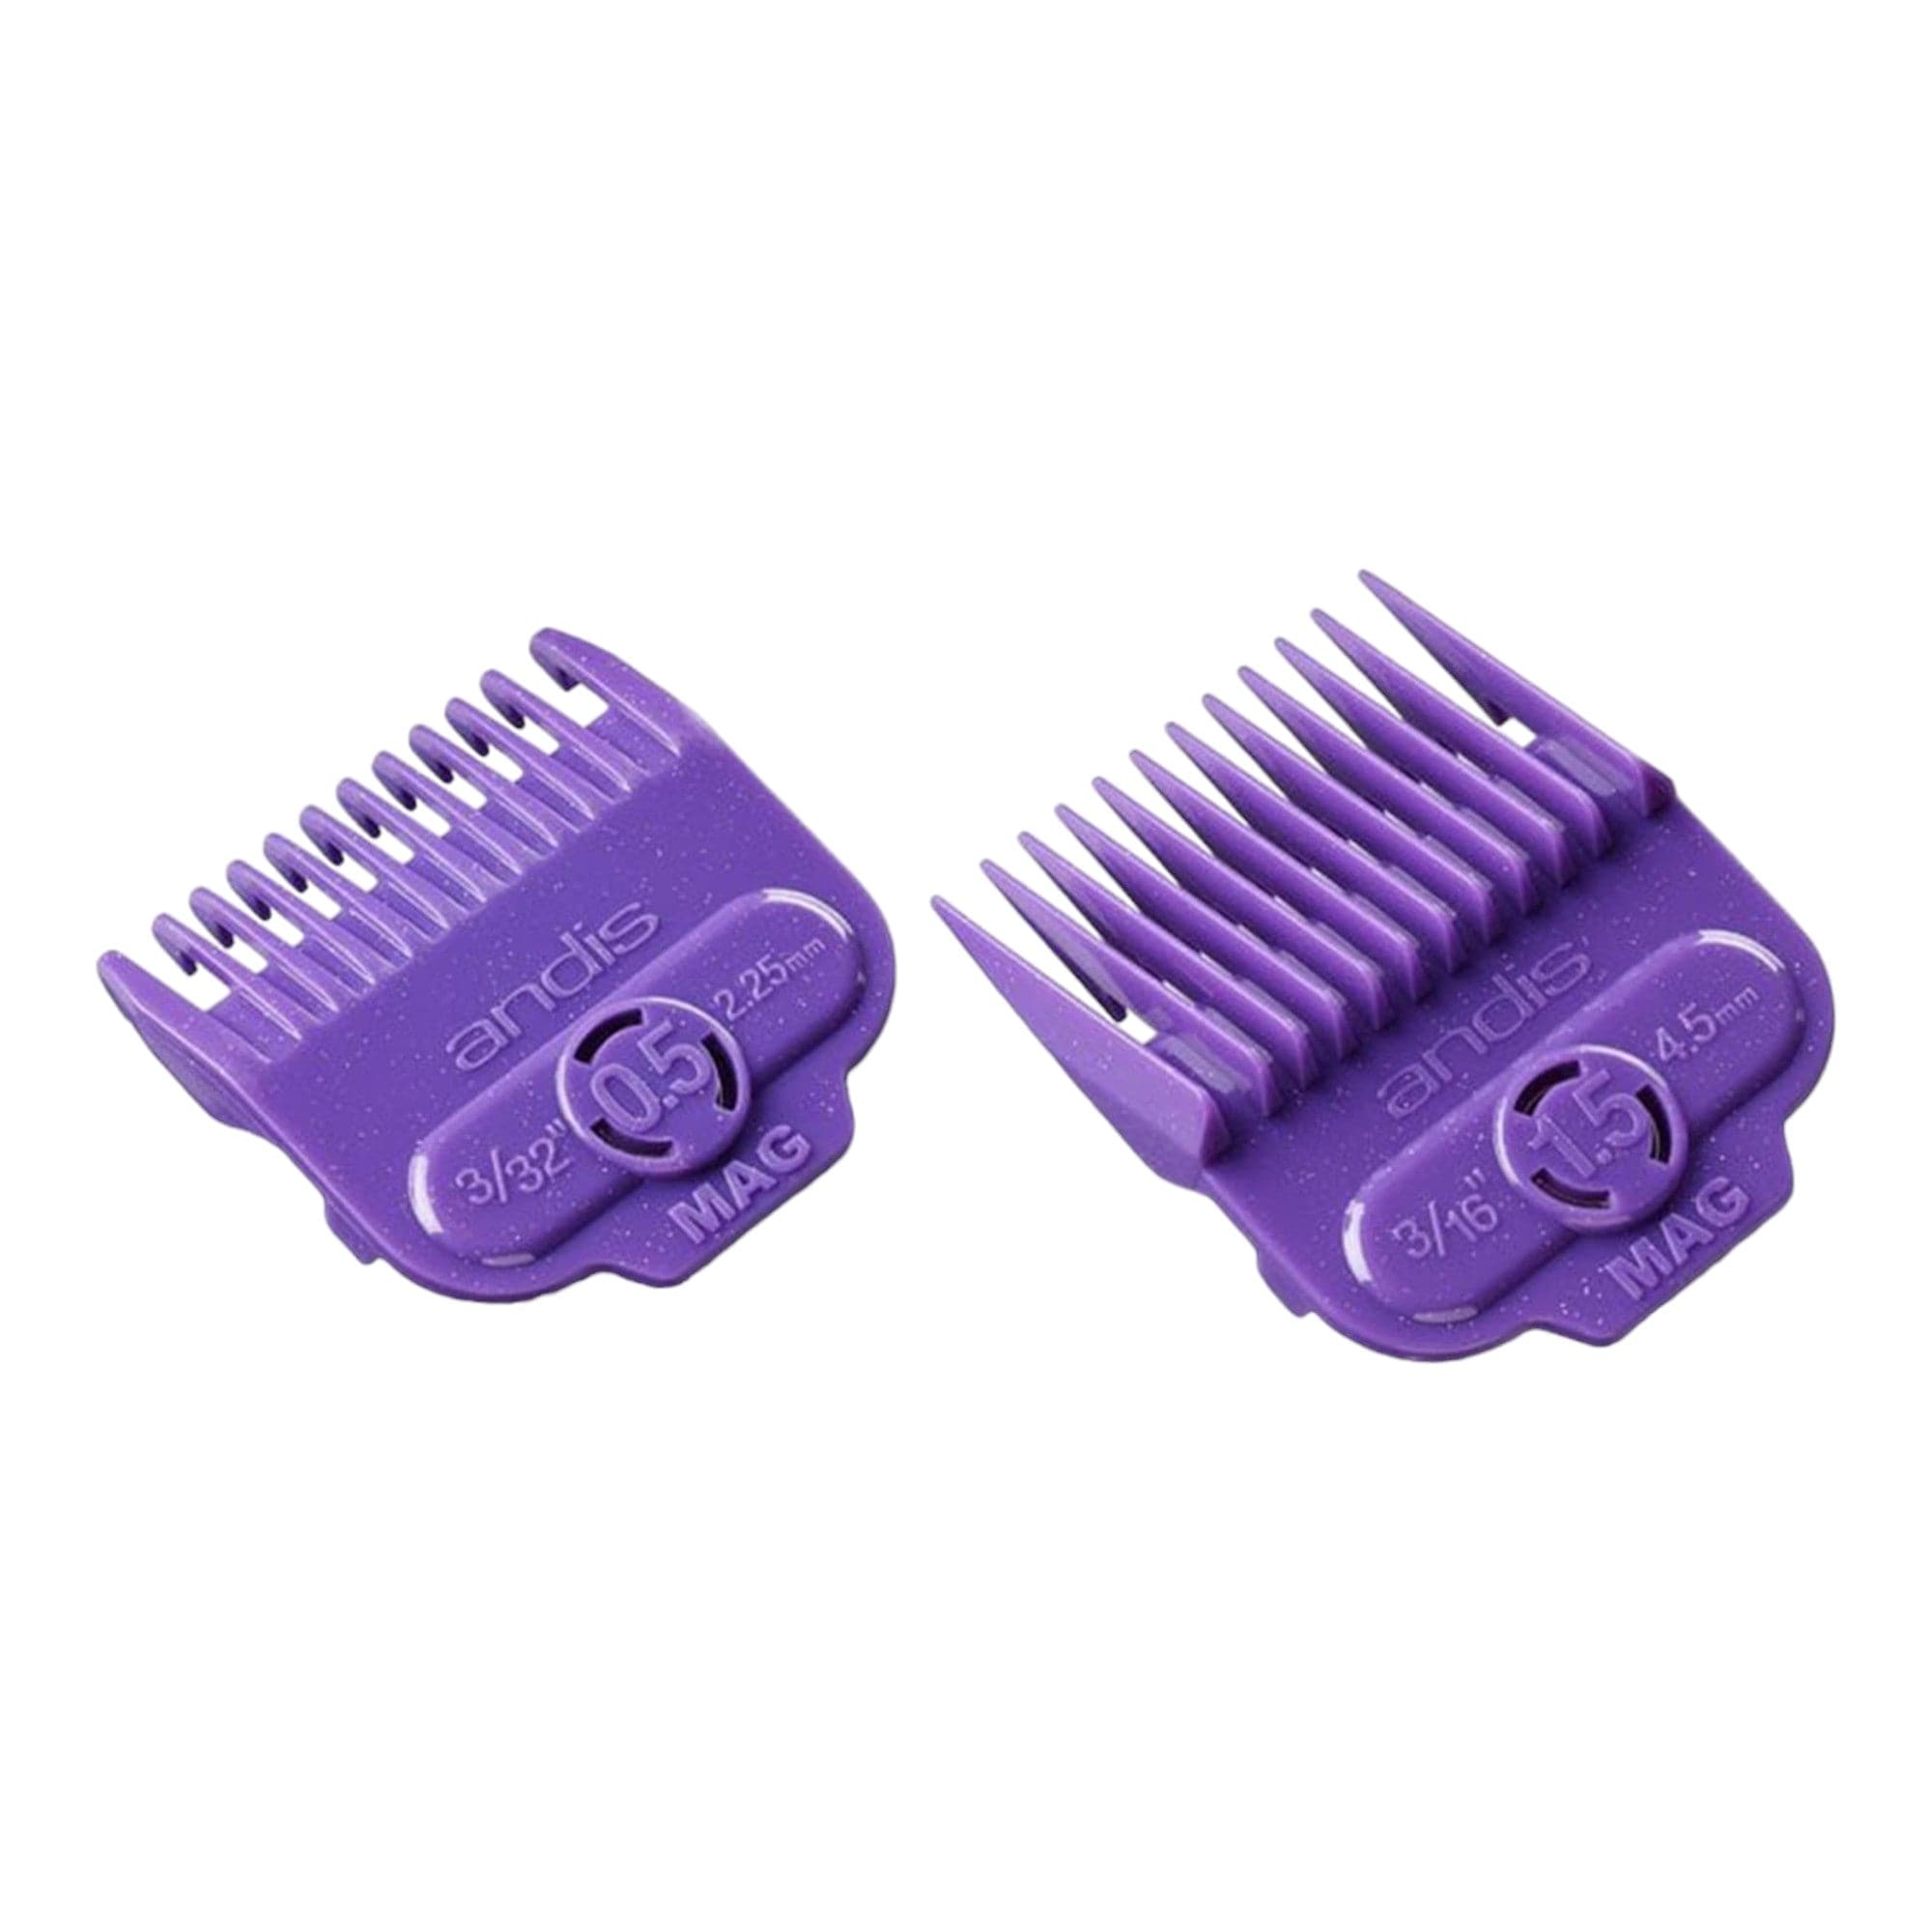 Andis - Single Magnetic Comb Set - Dual Pack 0.5 & 1.5 AS66560